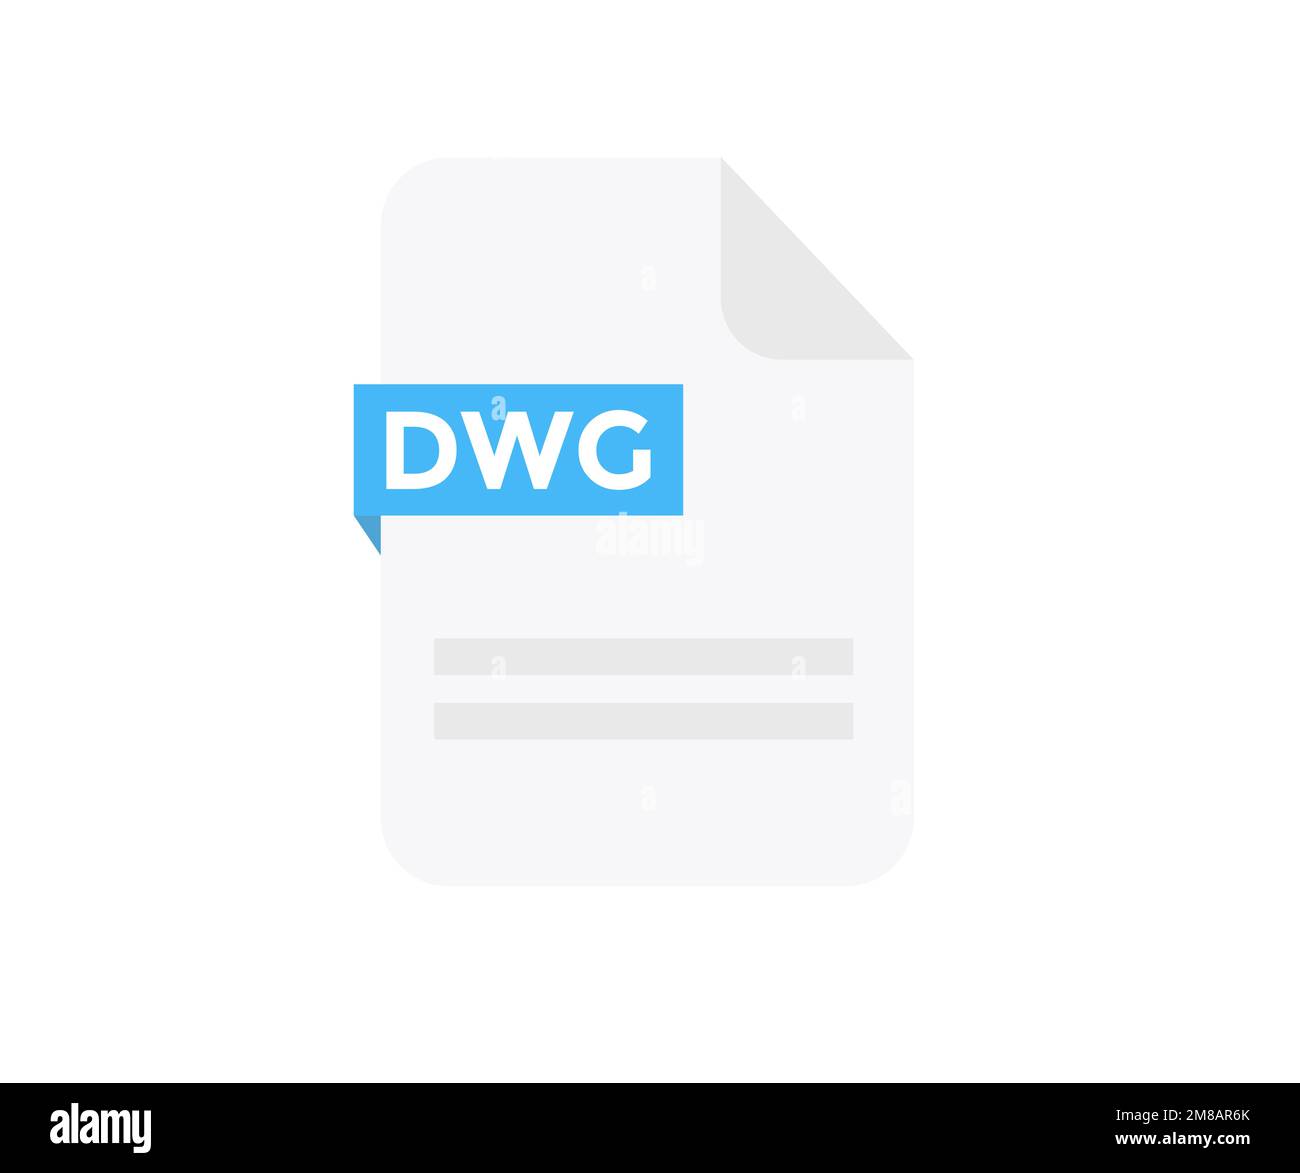 File format DWG logo design. Document file icon. Element for applications, web sites & data services. Format and extension of documents vector design. Stock Vector